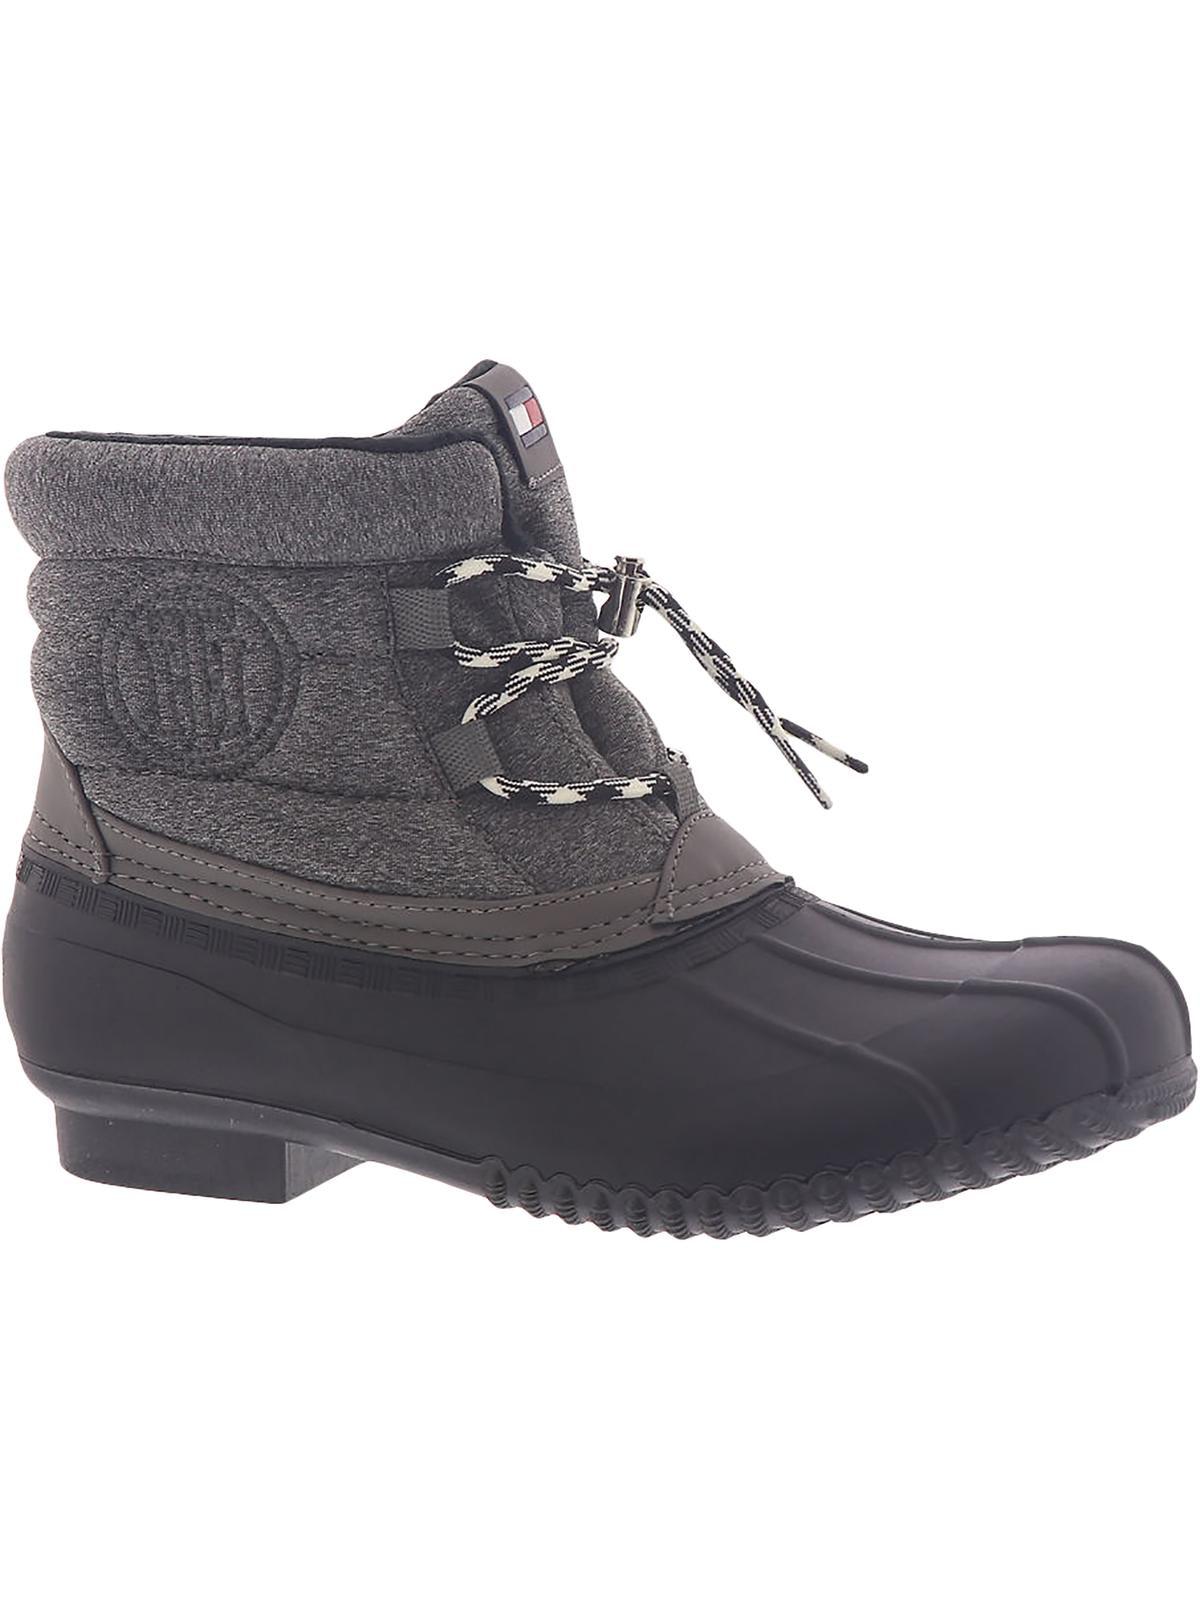 Tommy Hilfiger Rehma Rubber Lace Up Winter Boots in Black | Lyst